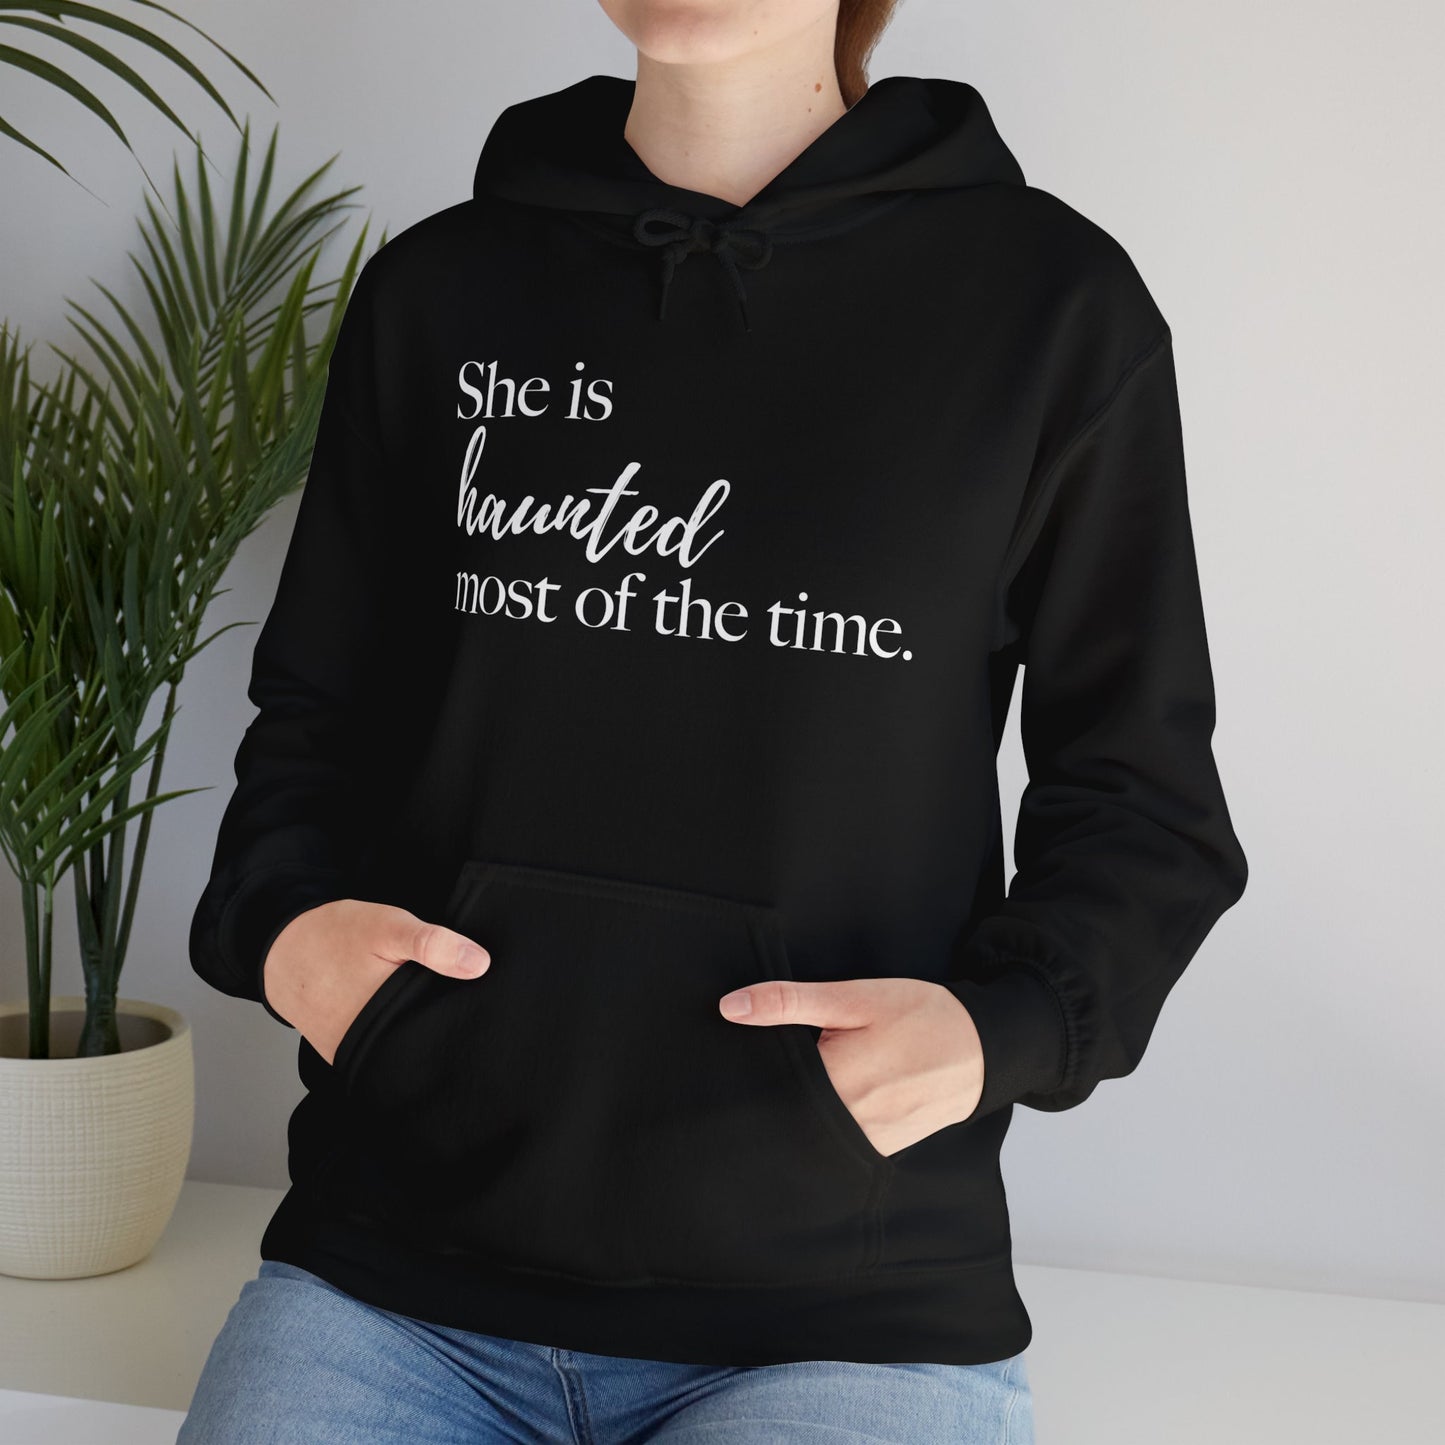 She is Haunted Most of the Time Hoodie Hooded Sweatshirt Ghosts Ethereal Mysterious